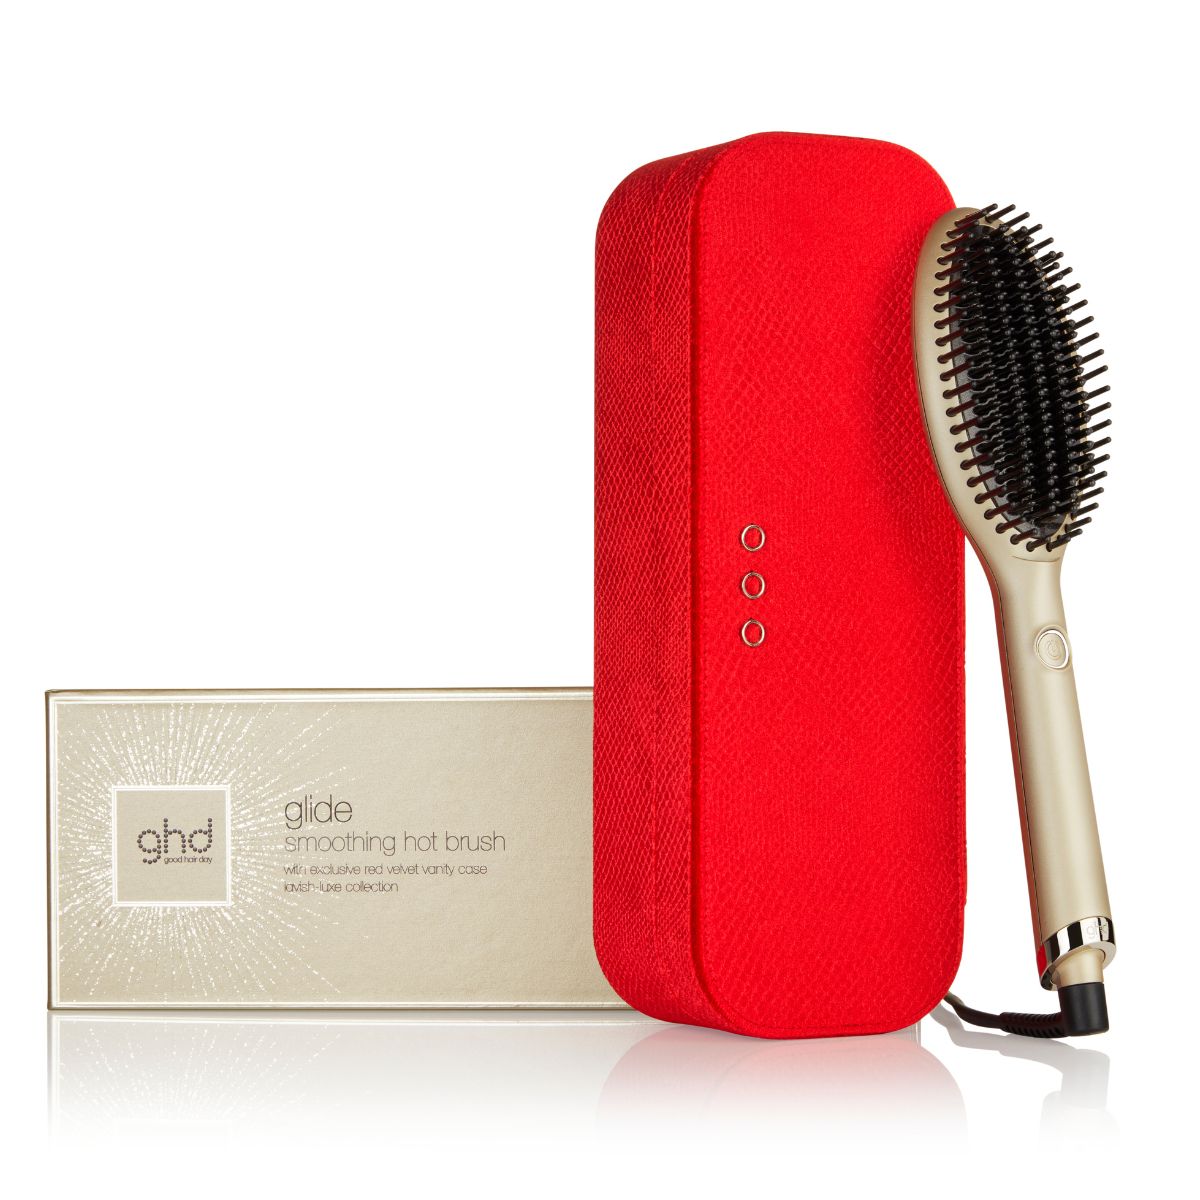 GHD Gold Limited Edition Glide Smoothing Hot Brush in Champagne Gold